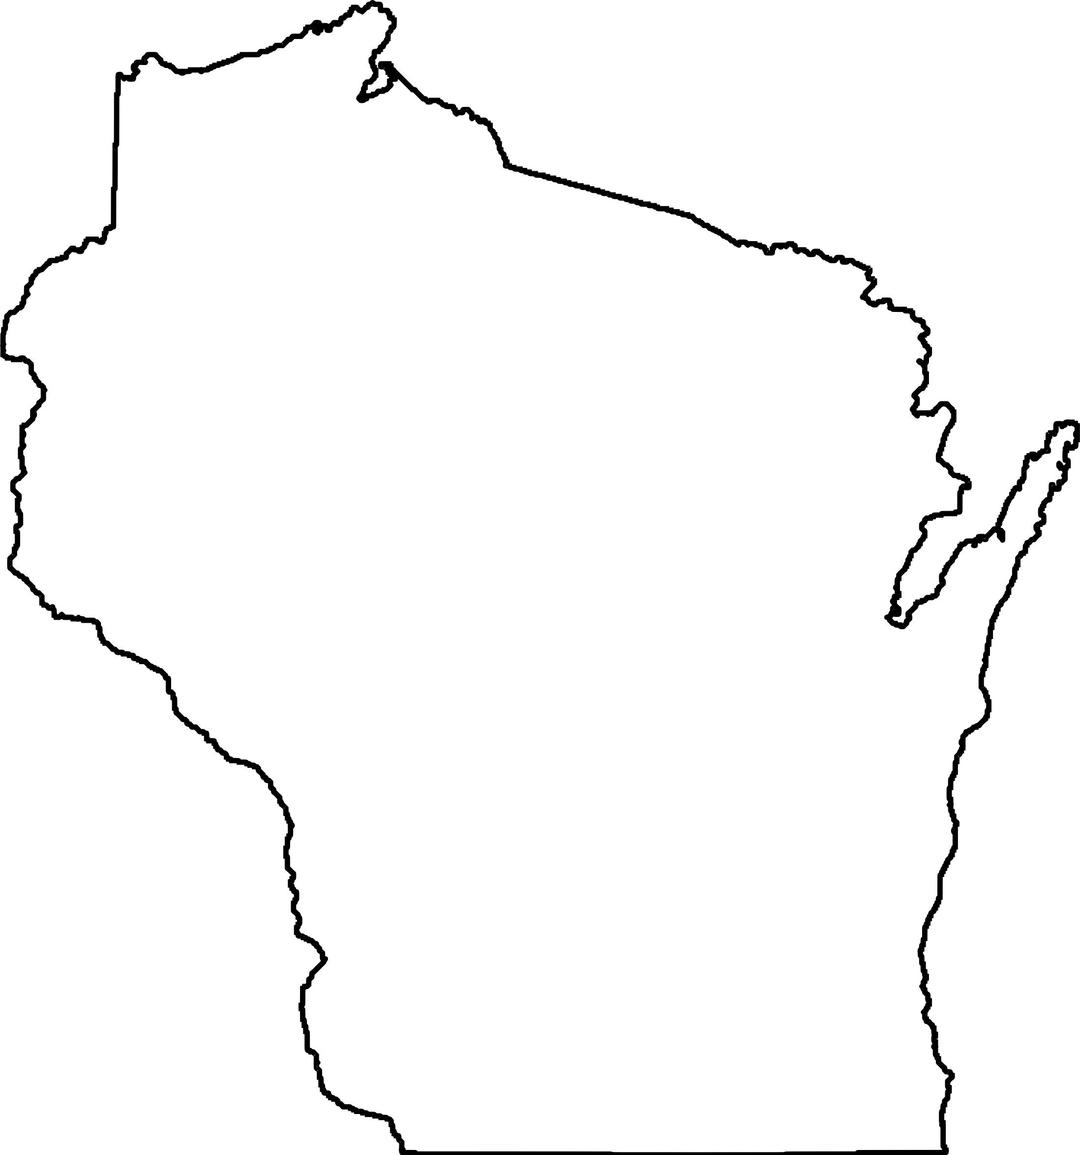 Coloring Book Wisconsin png transparent